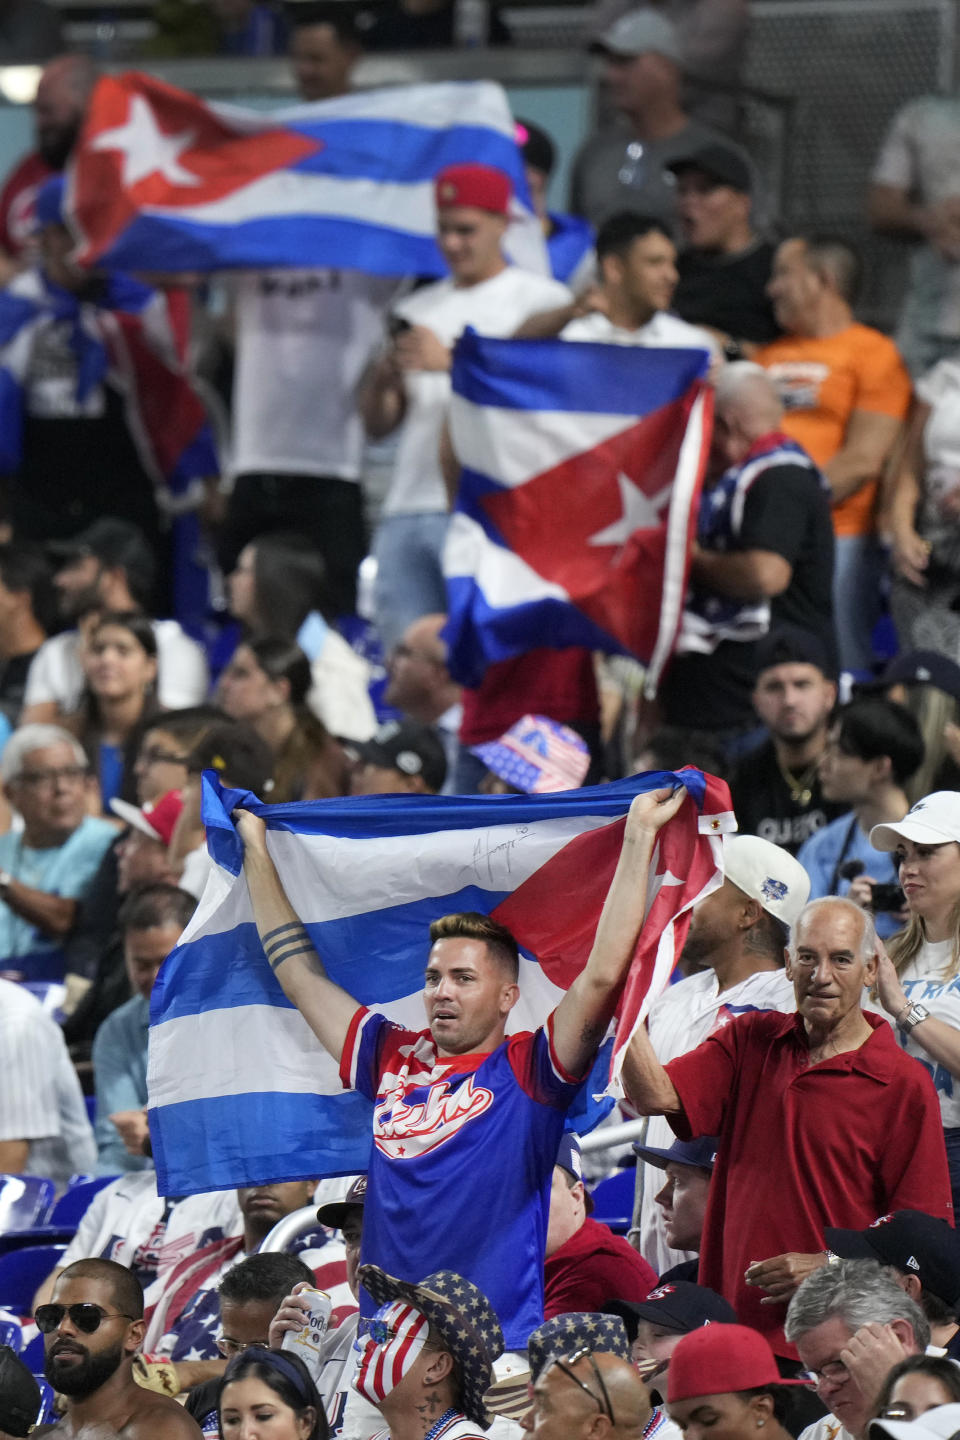 Cuba fans wave Cuban flags as the cheer during the first inning of a World Baseball Classic game between Cuba and the U.S., Sunday, March 19, 2023, in Miami. (AP Photo/Wilfredo Lee)